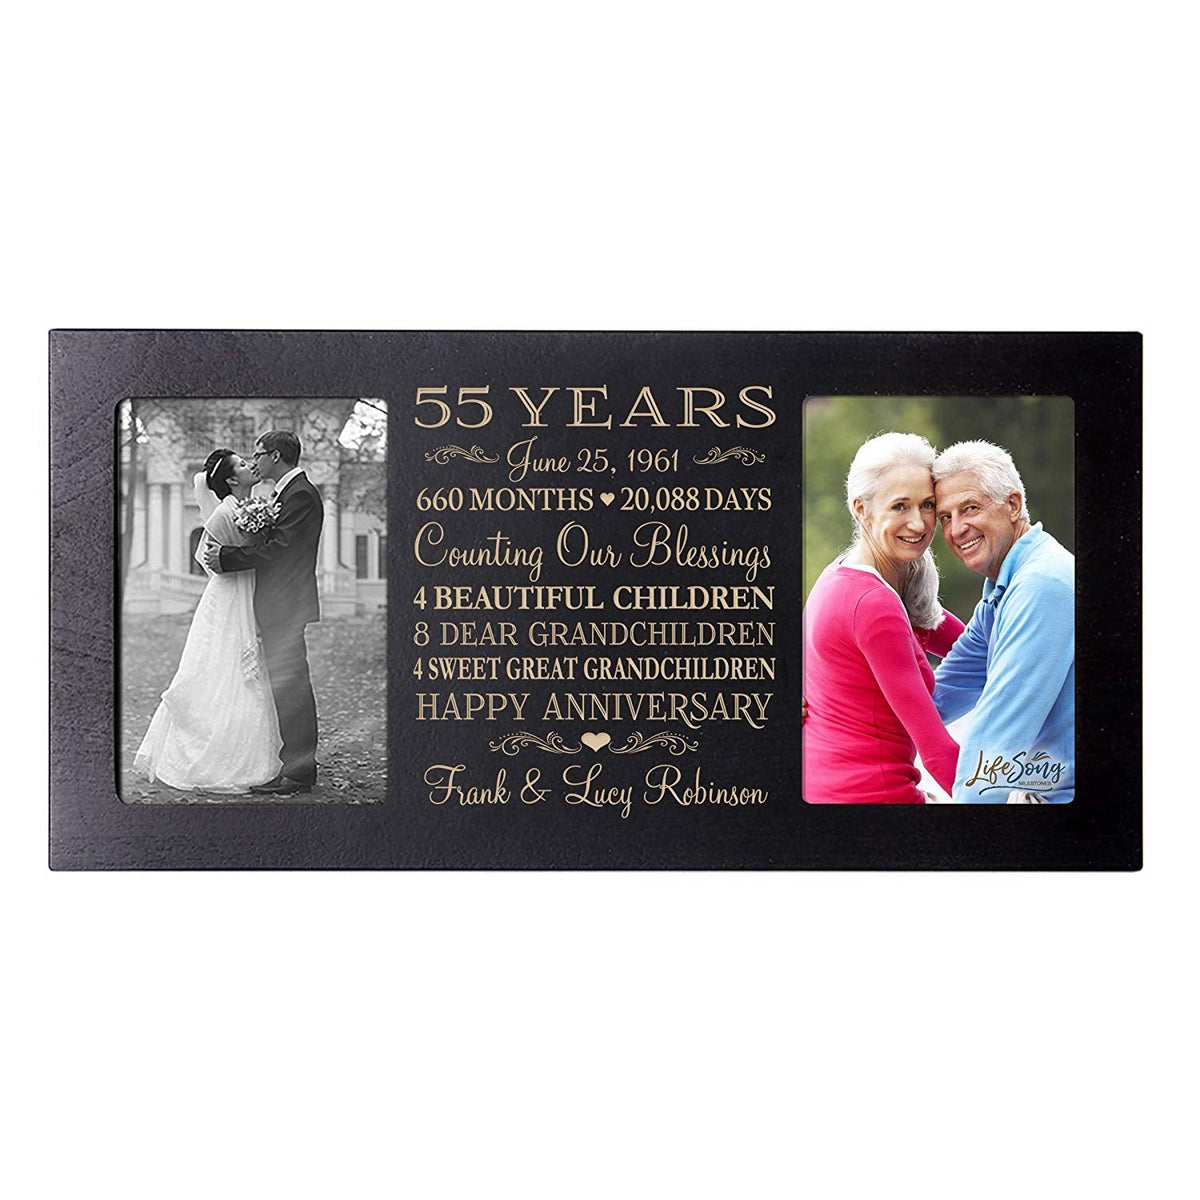 Lifesong Milestones Personalized Picture Frame for Couples 55th Wedding Anniversary Decorations